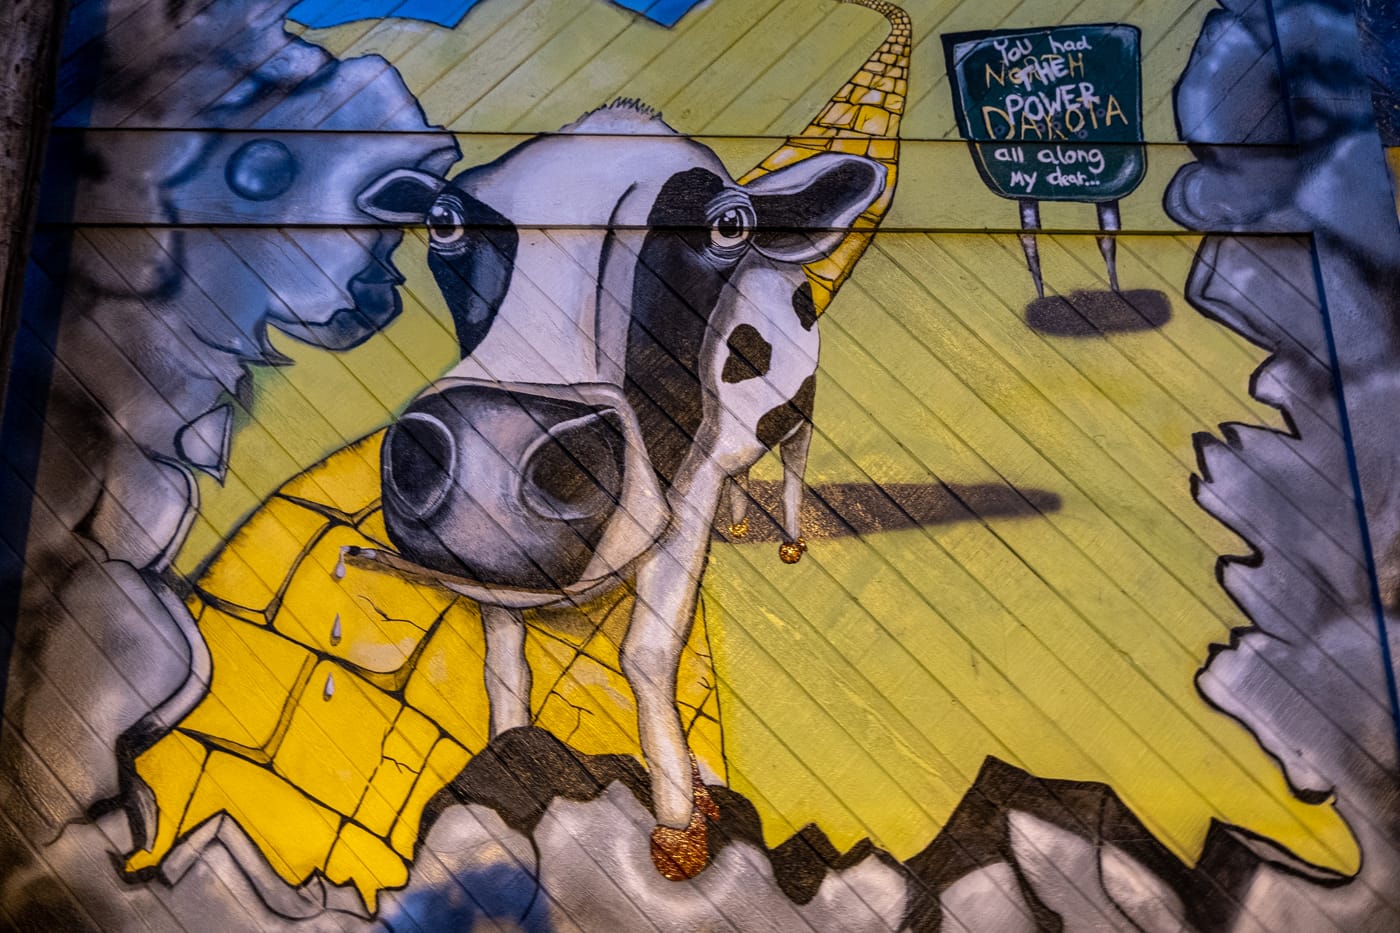 Mahalia Mees cow meets Wizard of Oz "Going Home" mural declares, "You had the power all along my dear..." Alley 5.5: Bismarck Art Alley in North Dakota - Street art and Murals in Bismarck, North Dakota